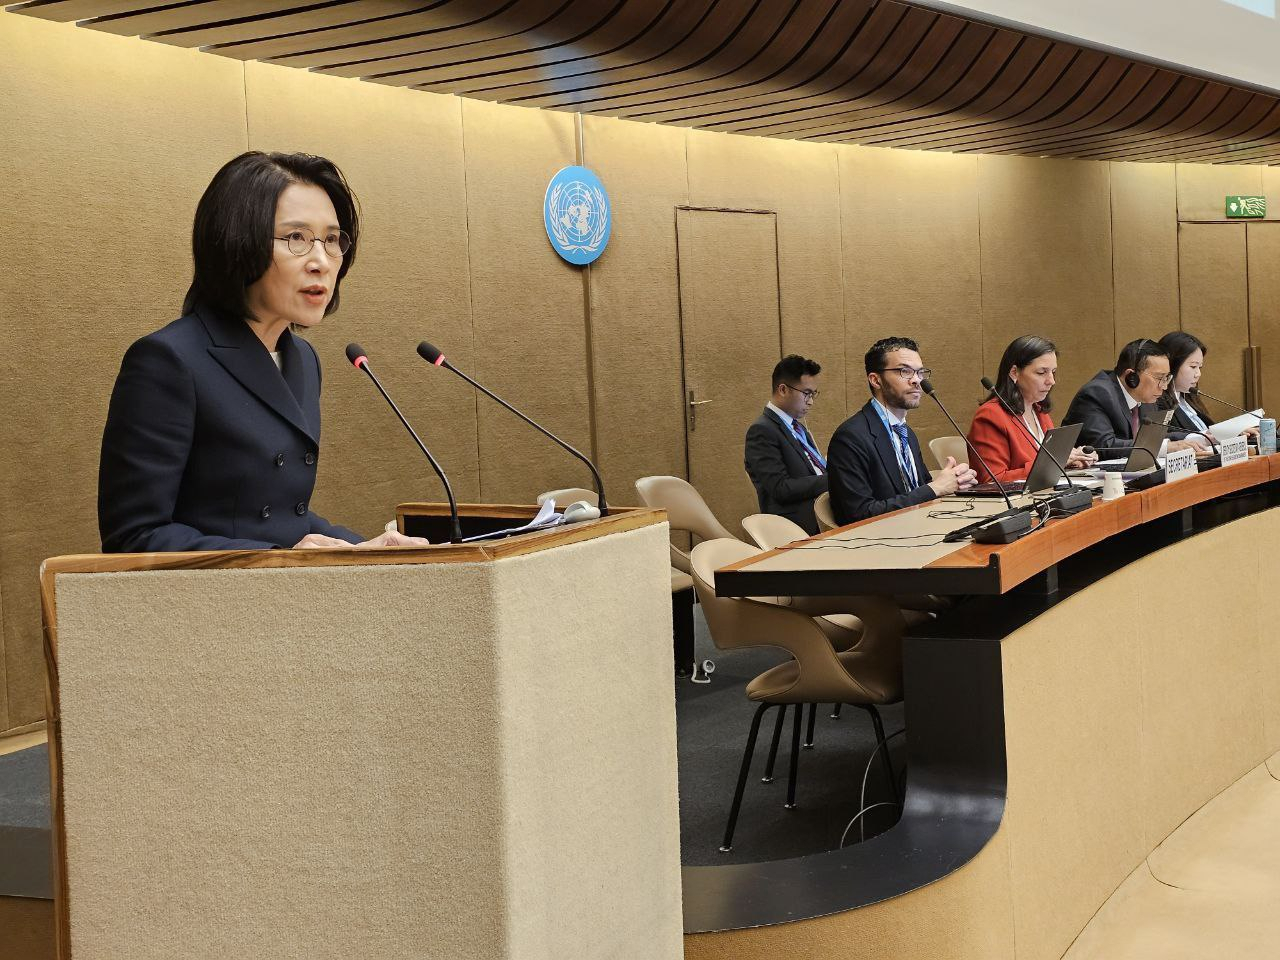 Second Vice Foreign Minister Kang In-sun (left) delivers her speech at the high-level segment of the UN Conference on Disarmament in Geneva on Monday. (Ministry of Foreign Affairs)